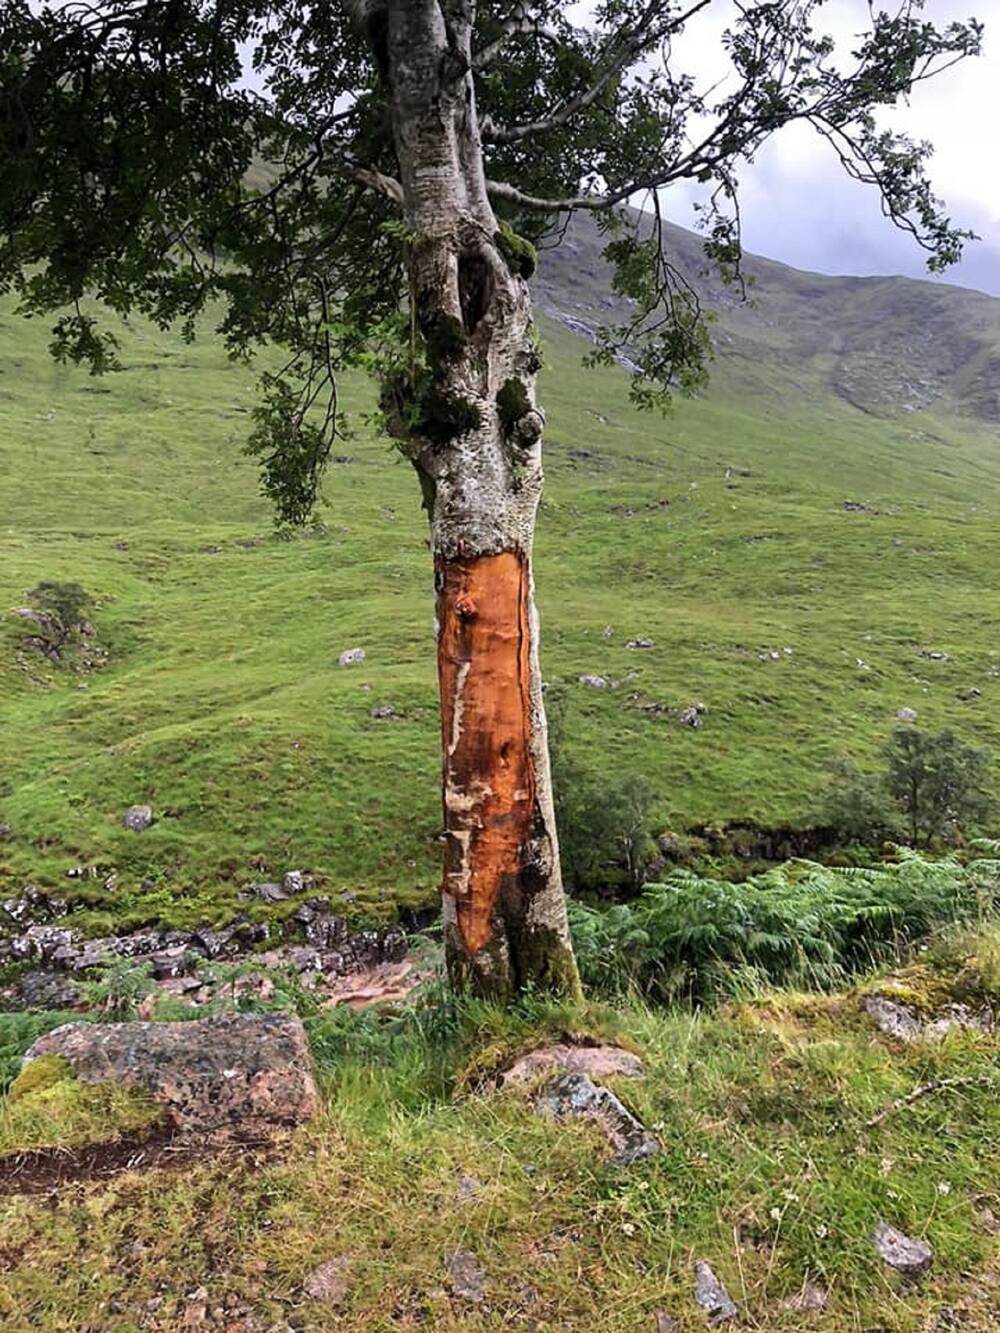 A solitary tree grows on a hillside, with open ground seen in the background. A large section of its trunk has been stripped and scored away, leaving a bad scar on the tree.